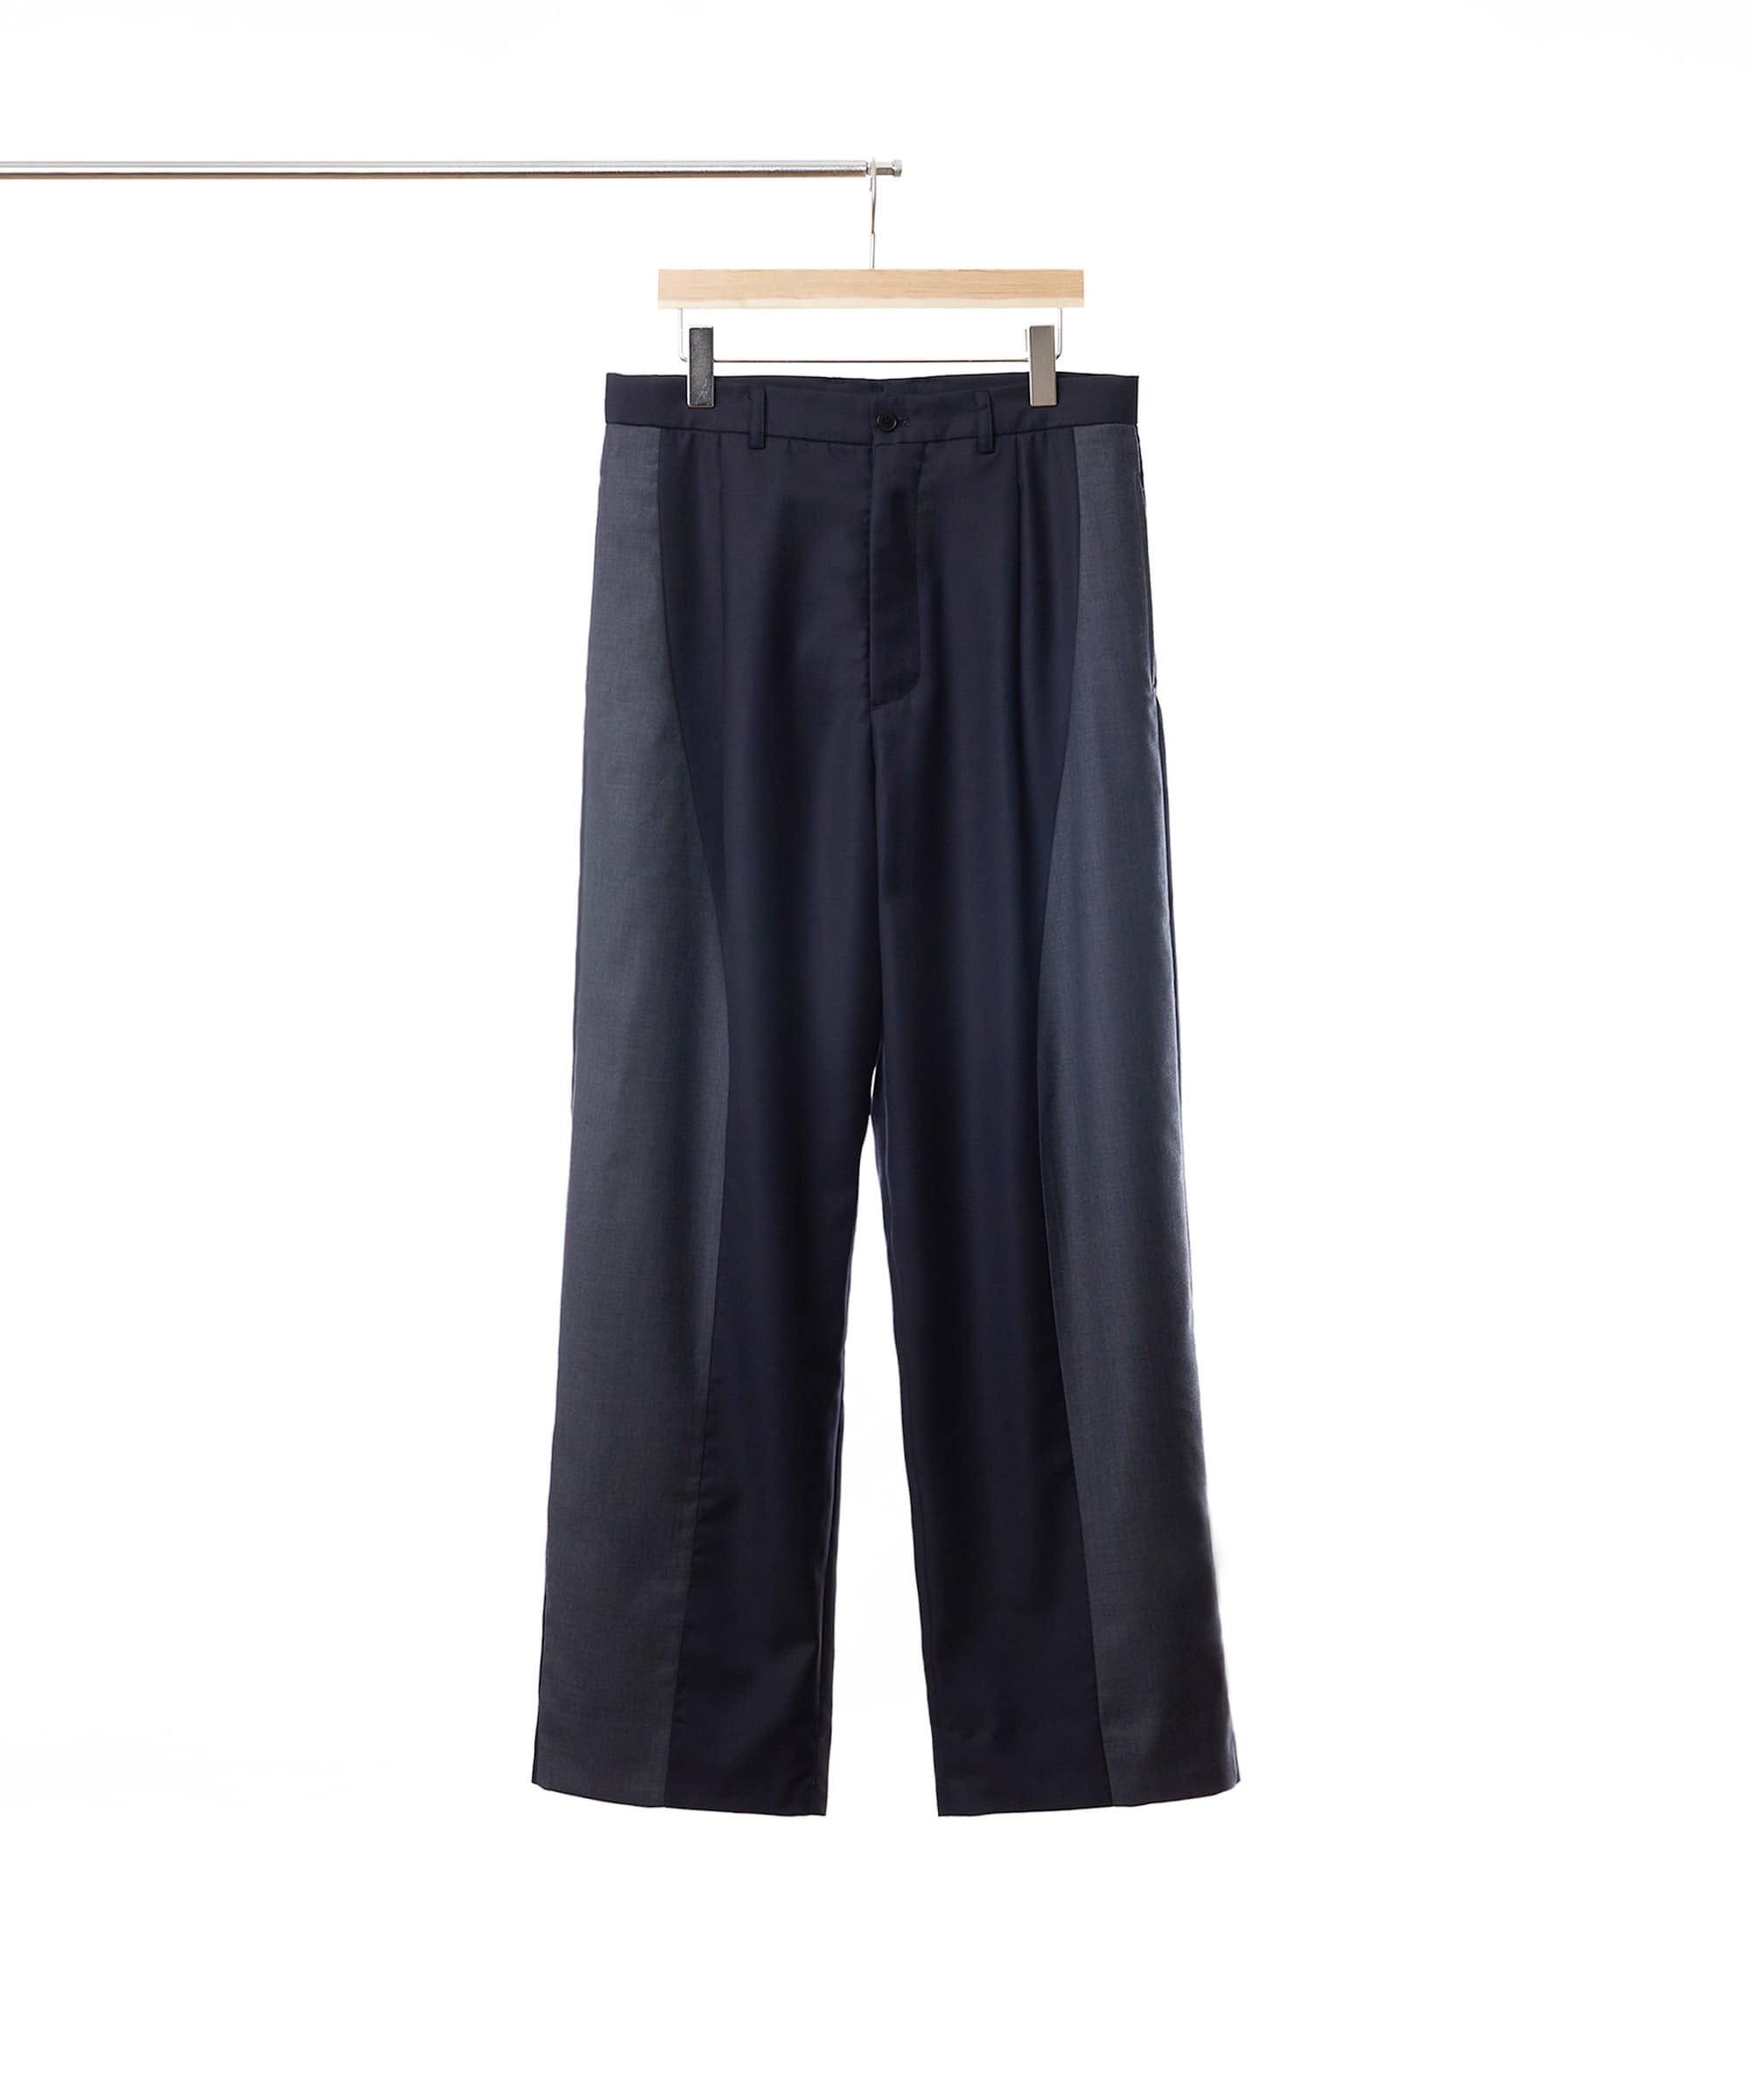 TWO TONE WIDE TROUSERS NAVY/GREY